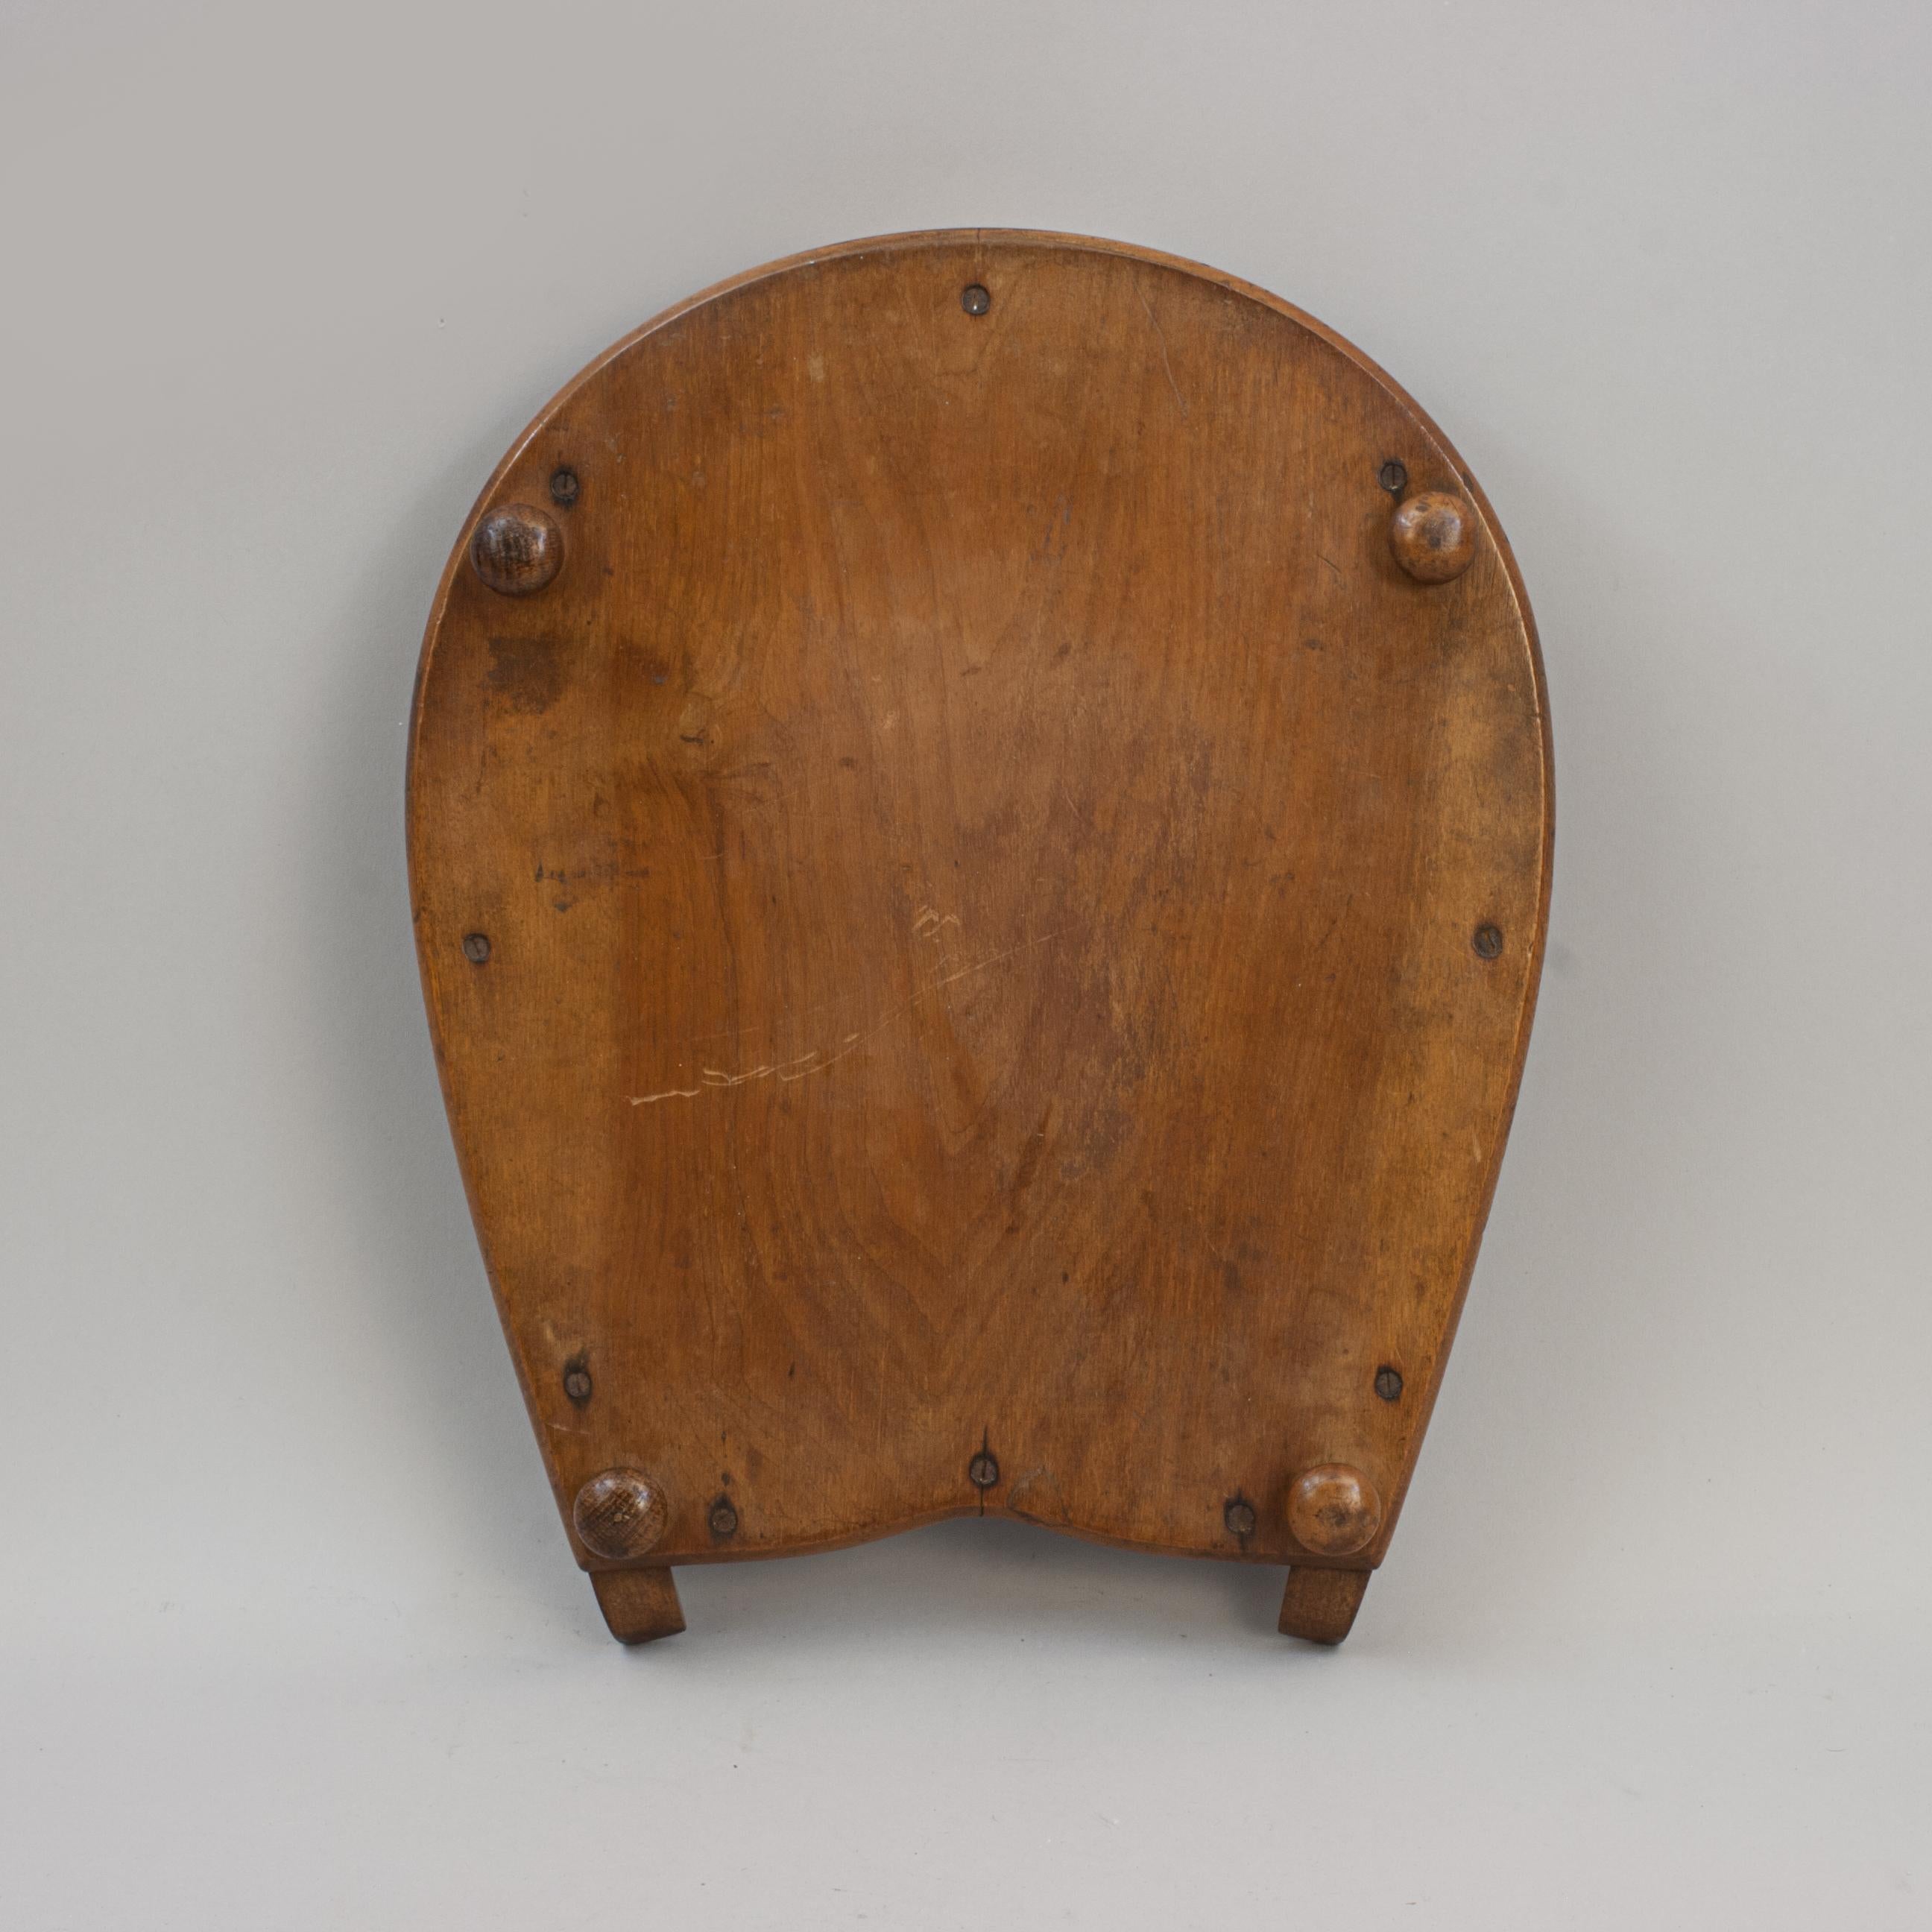 Walnut Antique Equestrian Horseshoe Tray For Sale